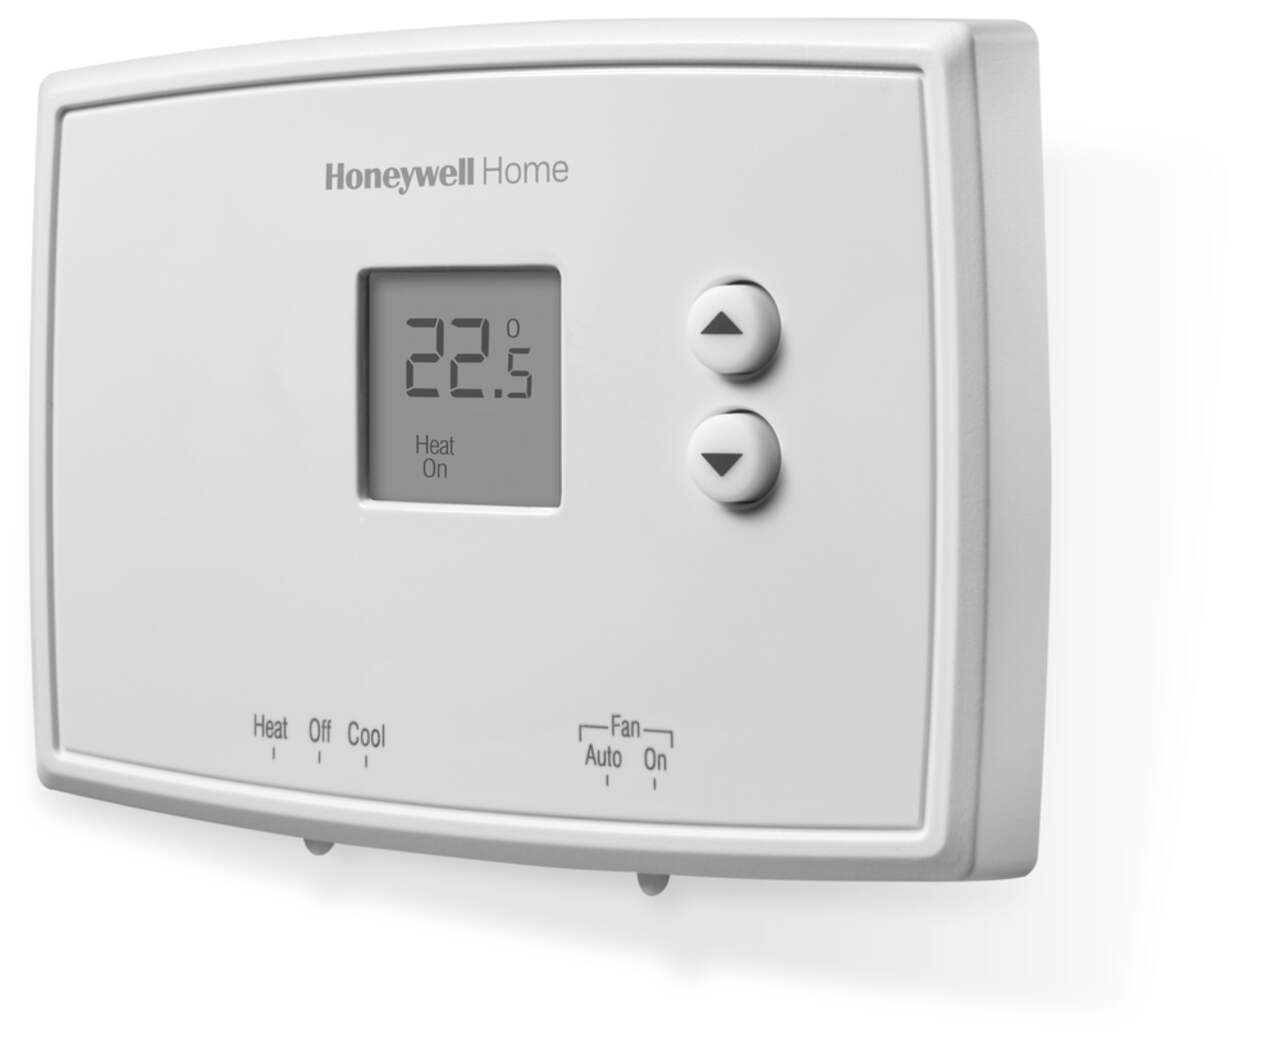 Wholesale honeywell thermostat For Effective Temperature Measurement 